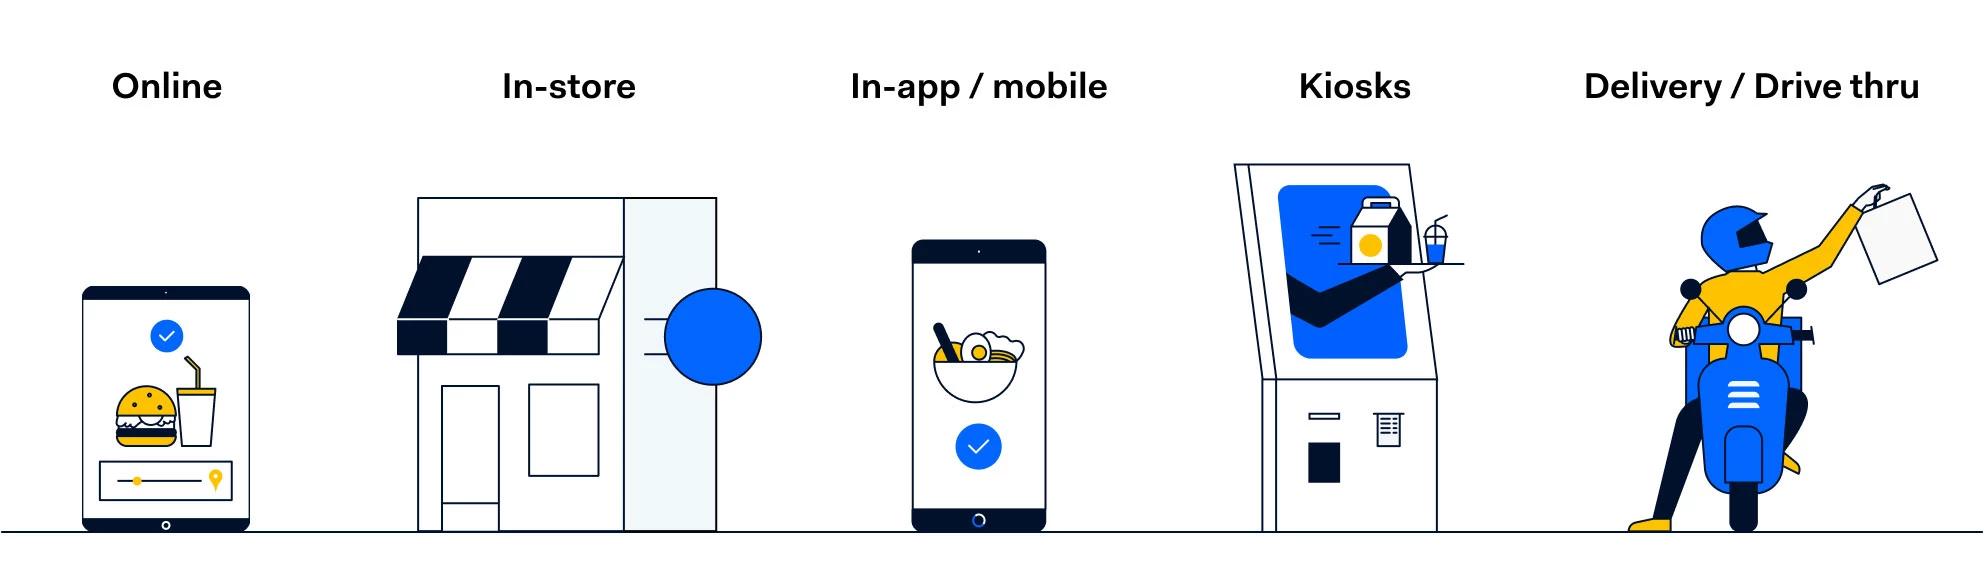 Illustrations for online, in-store, in-app, kiosks, and delivery channels for QSR